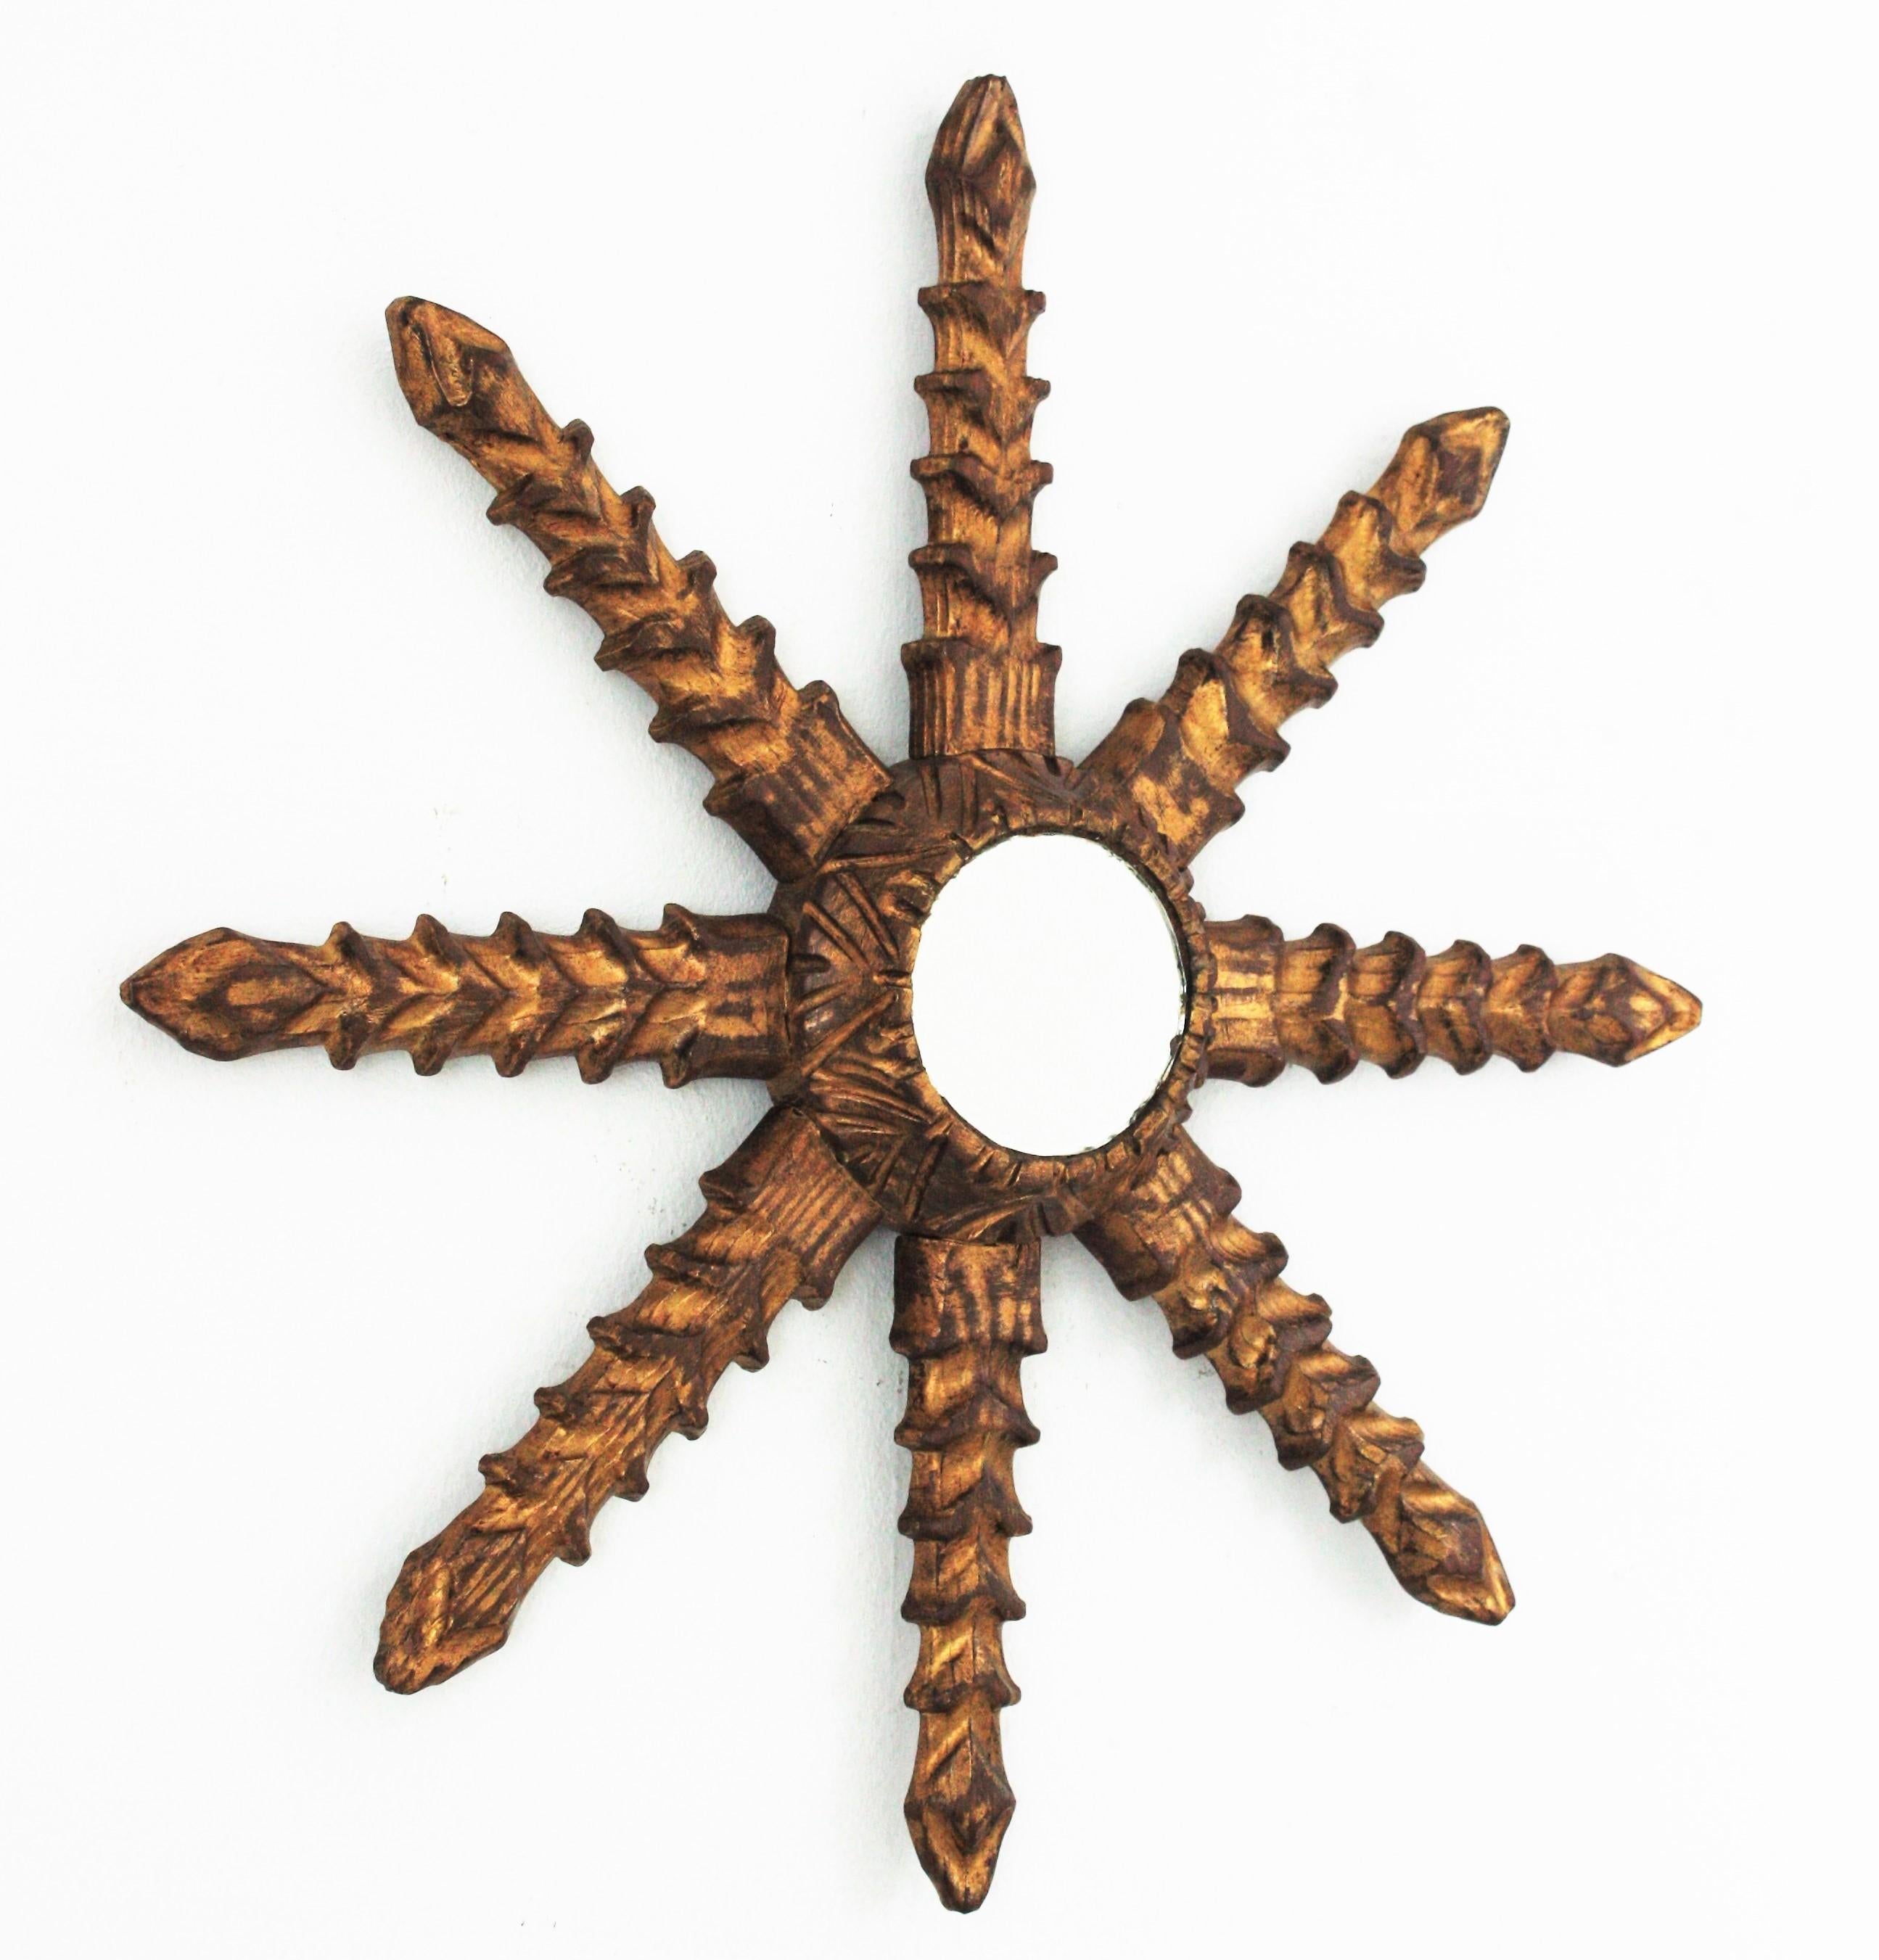 Starburst Sunburst Mirror, Carved Giltwood
A beautiful carved giltwood starburst wall mirror, Spain, 1950s-1960s.
This hand carved star shaped sunburst mirror has an unusual design with thick jagged rays.
Carved wood patinated in gilded